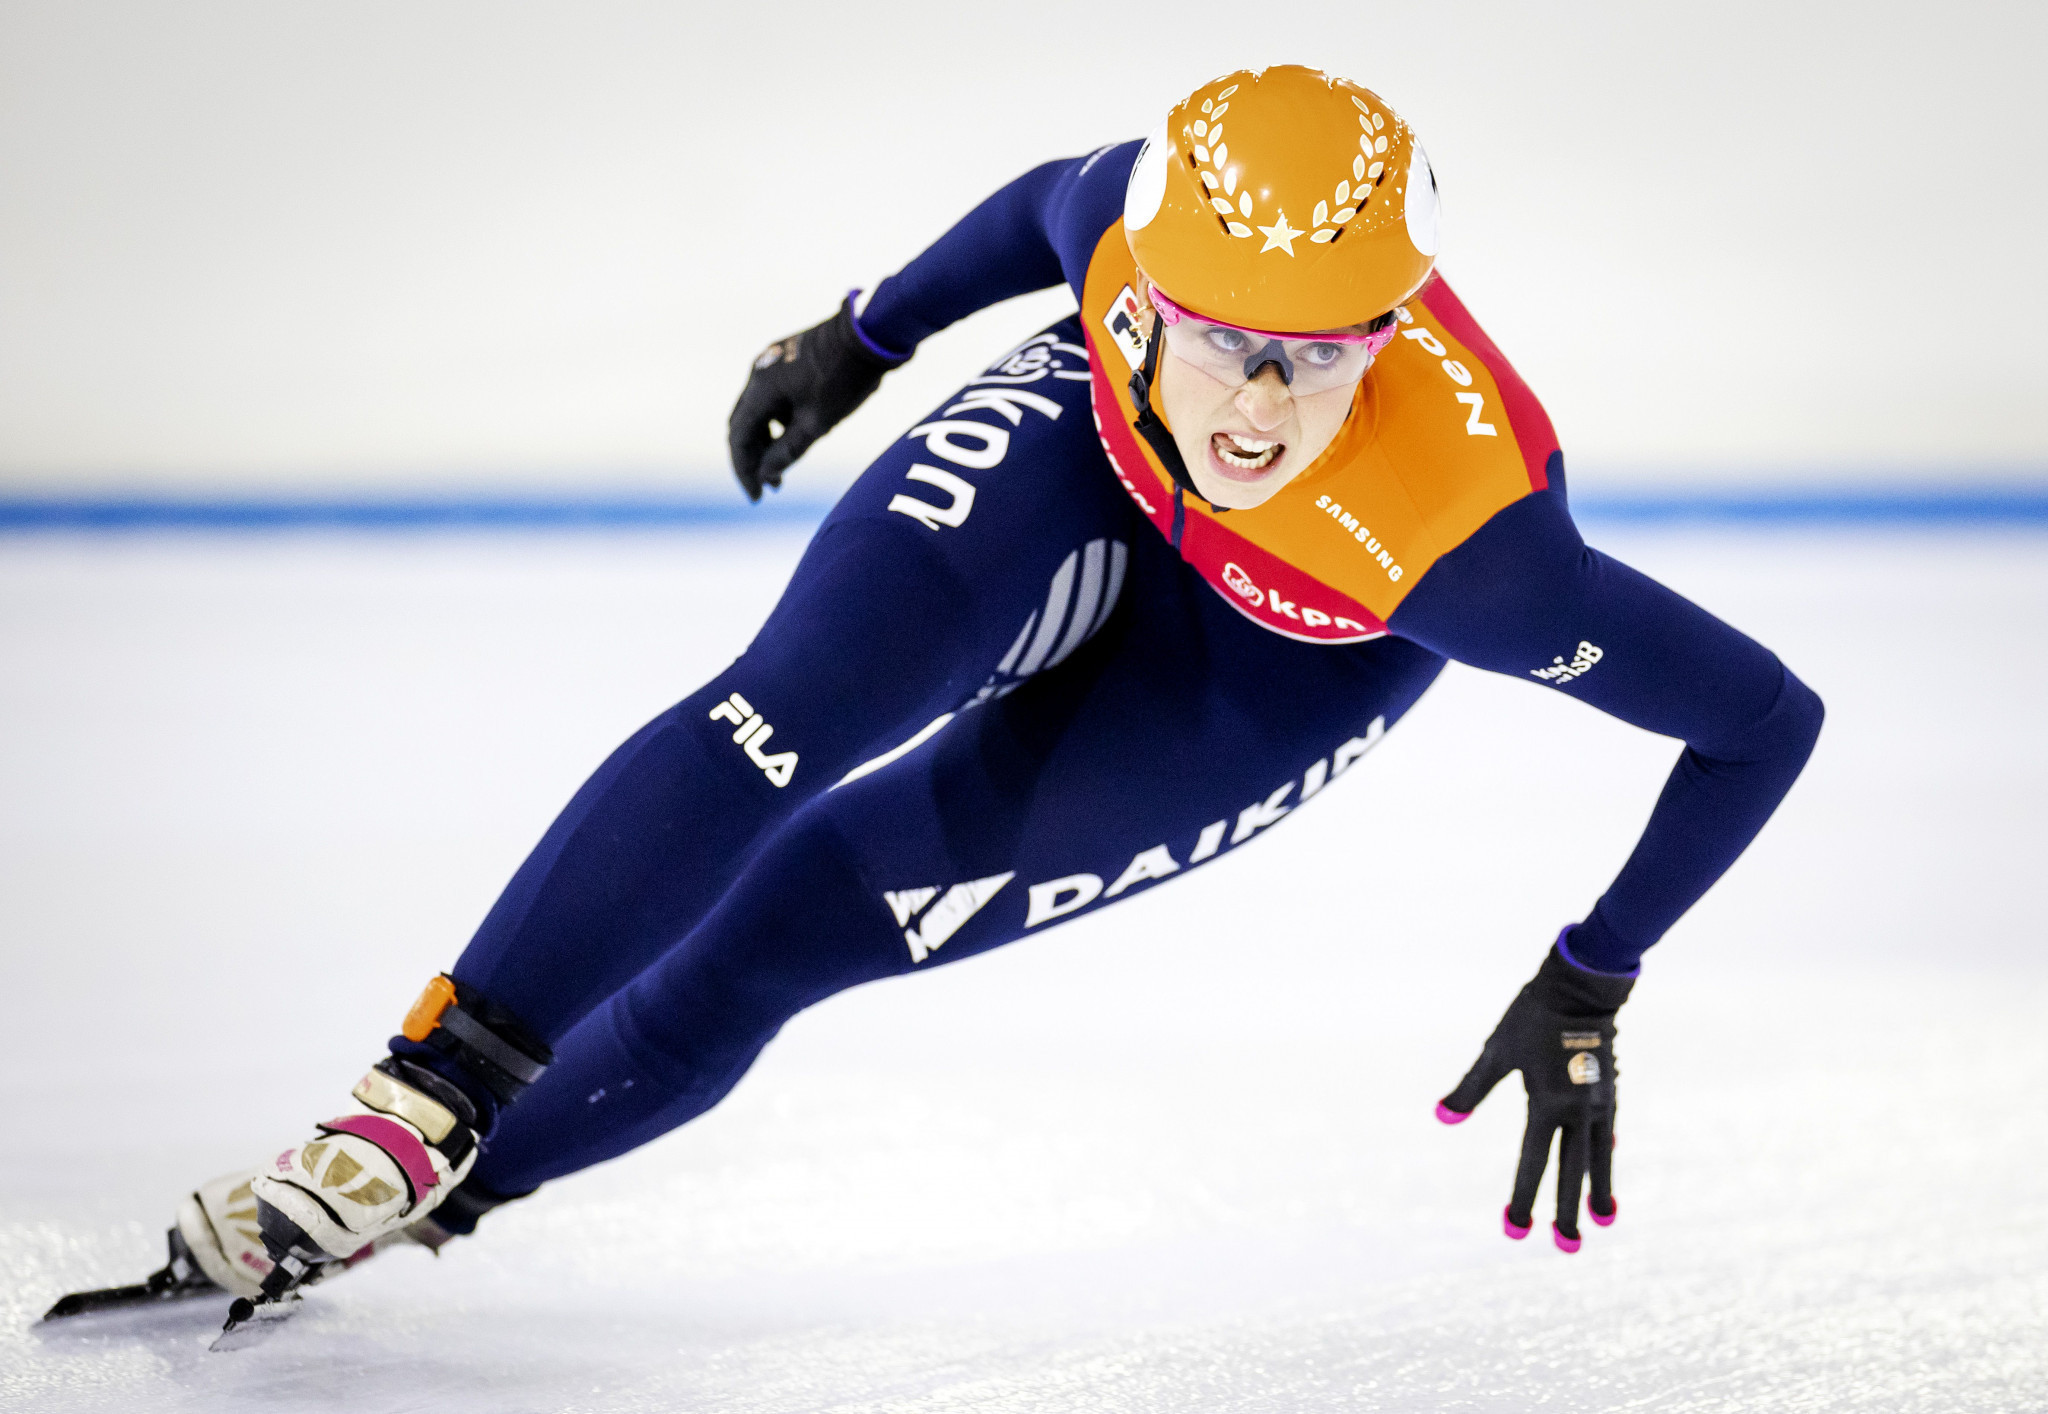 Suzanne Schulting enjoyed another dominant day at the ISU Short Track World Cup in her native Dordrecht ©Getty Images